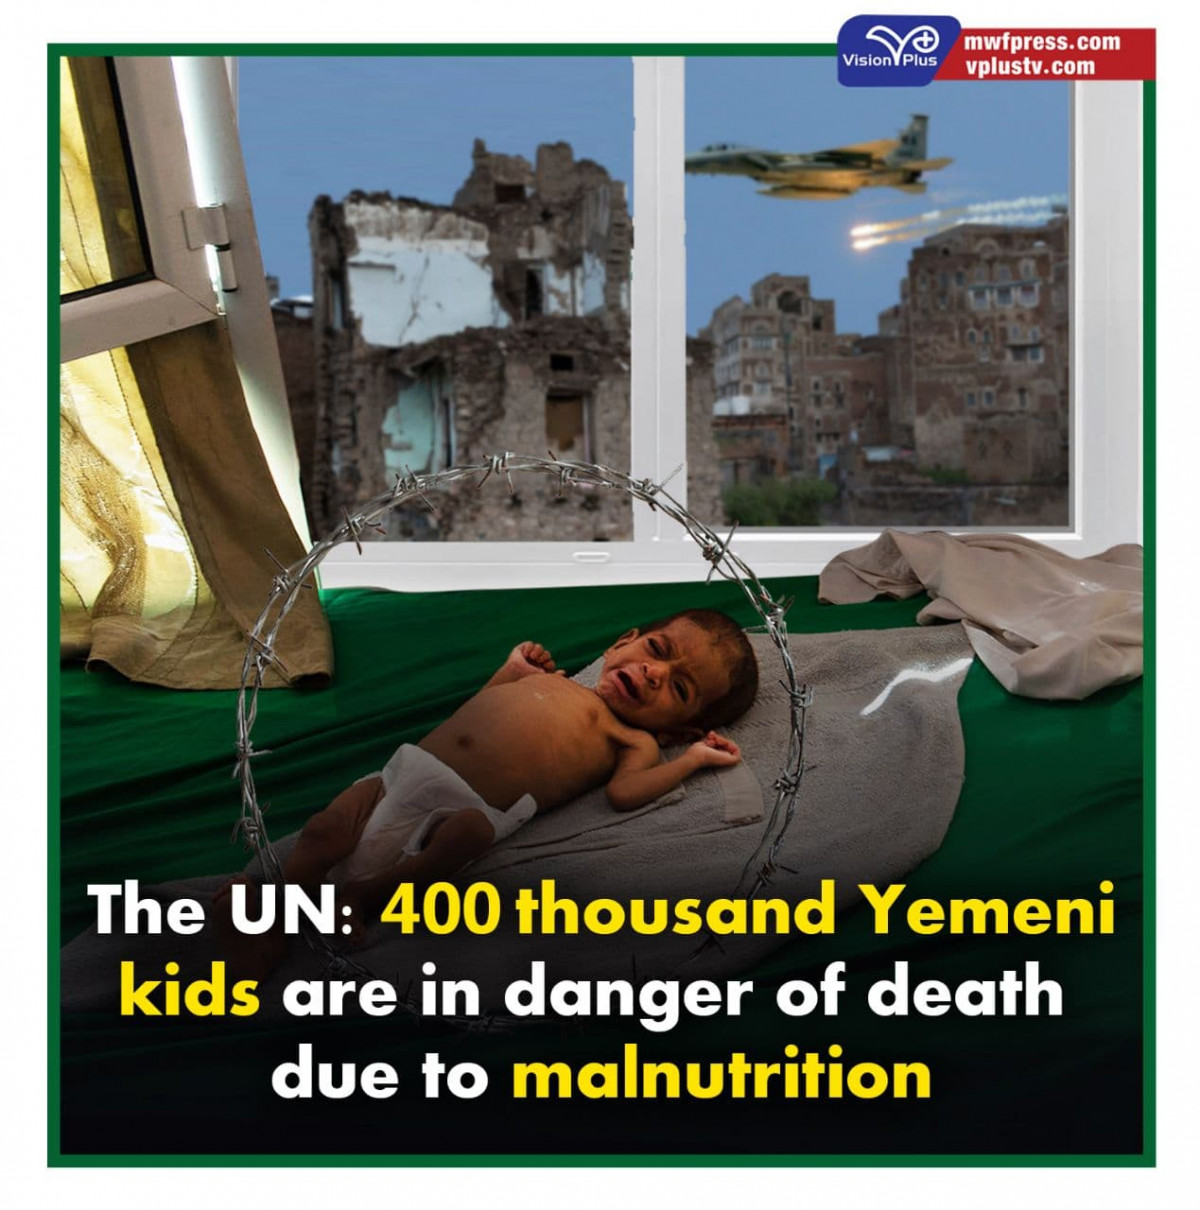 The UN: 400 thousand Yemeni kids are in danger of death due to malnutrition